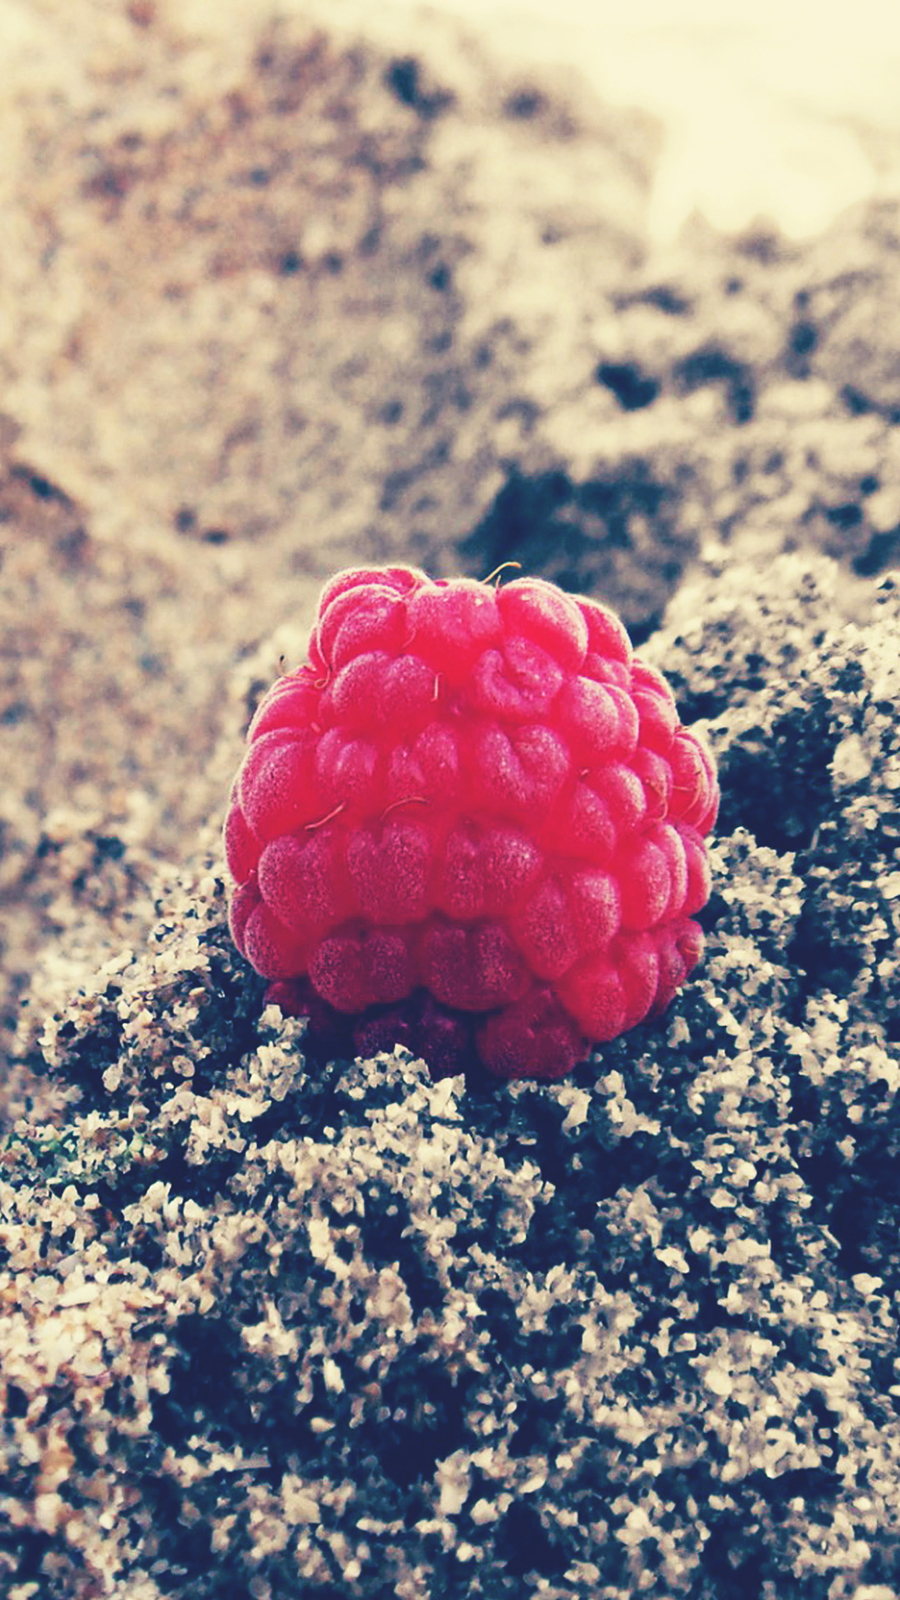 Red Raspberry HTC Macro Android Wallpaper